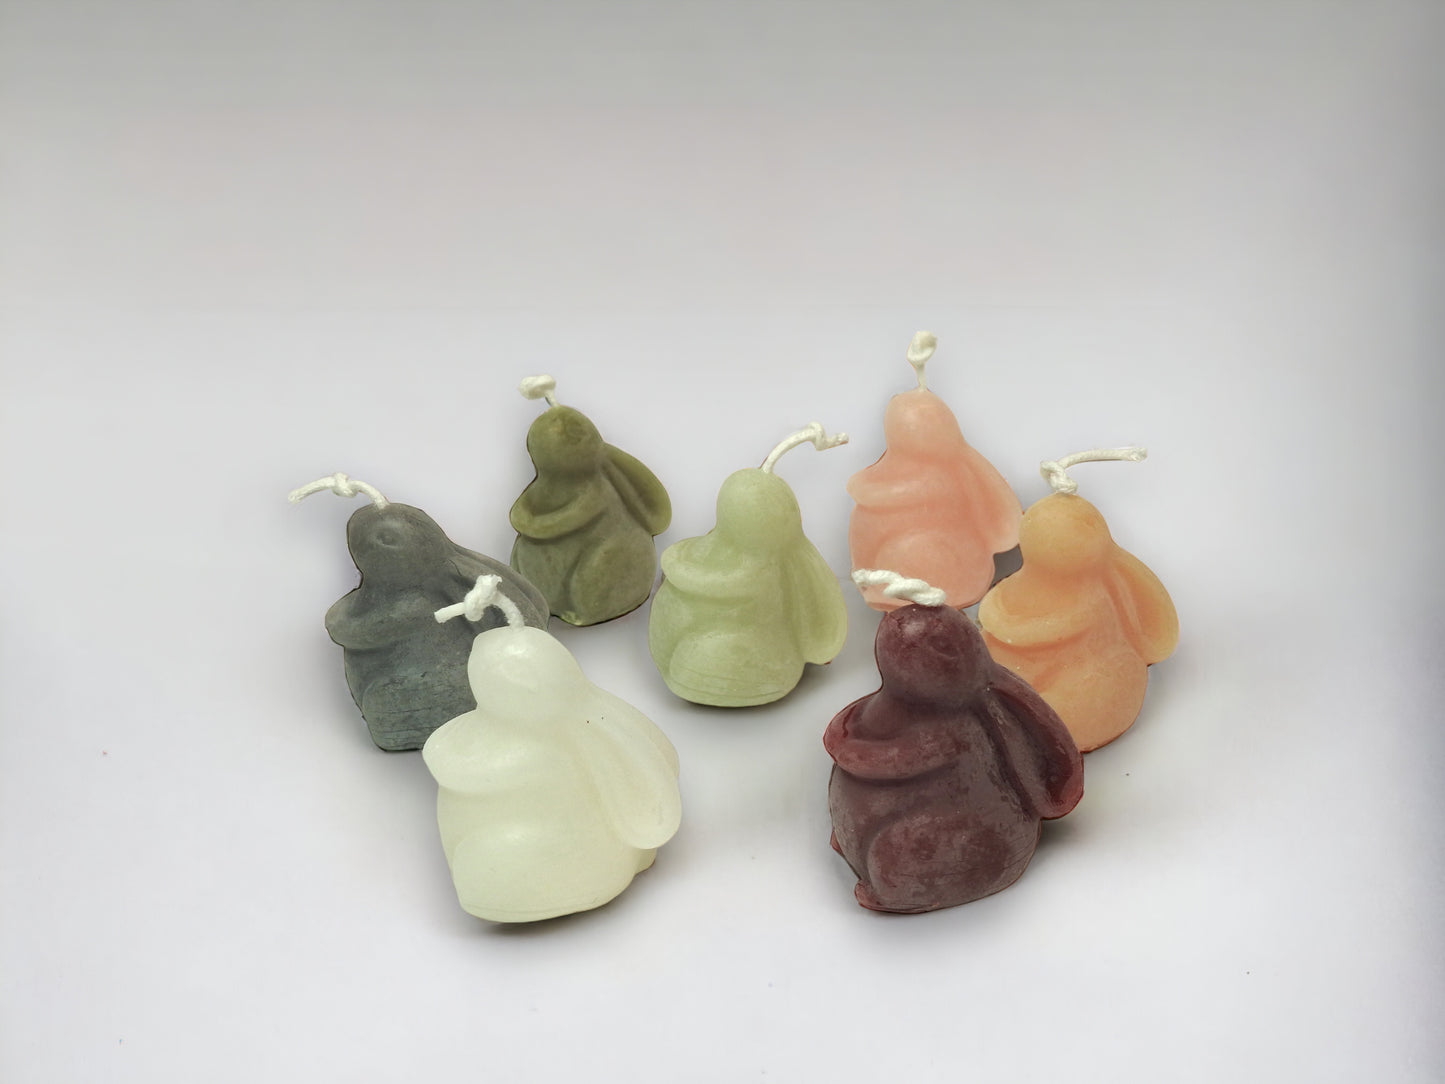 Ternary Candles, Ternary botanicals, by Natalie McCullough